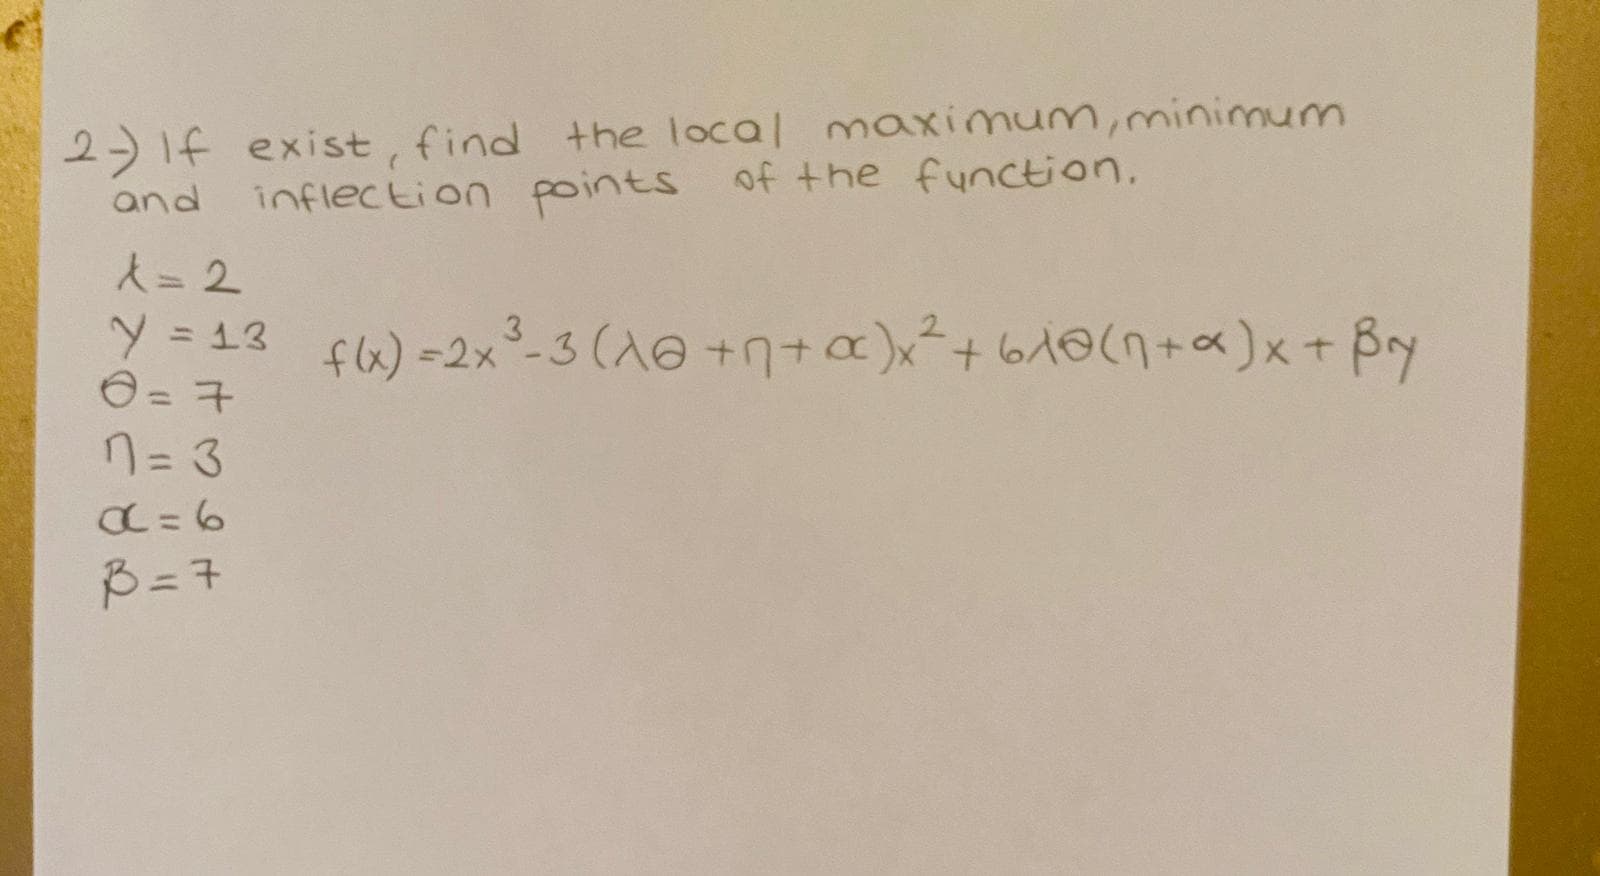 2- If exist, find the local
and
inflection points of the function.
A= 2
Y =
y=13 f6)=2x²-3(A@ +n+a)x²+610(n+x)x+ Bry
flx)=2x°-3 (1@ +n+a)x²+
%3D
7= 3
B = 7
